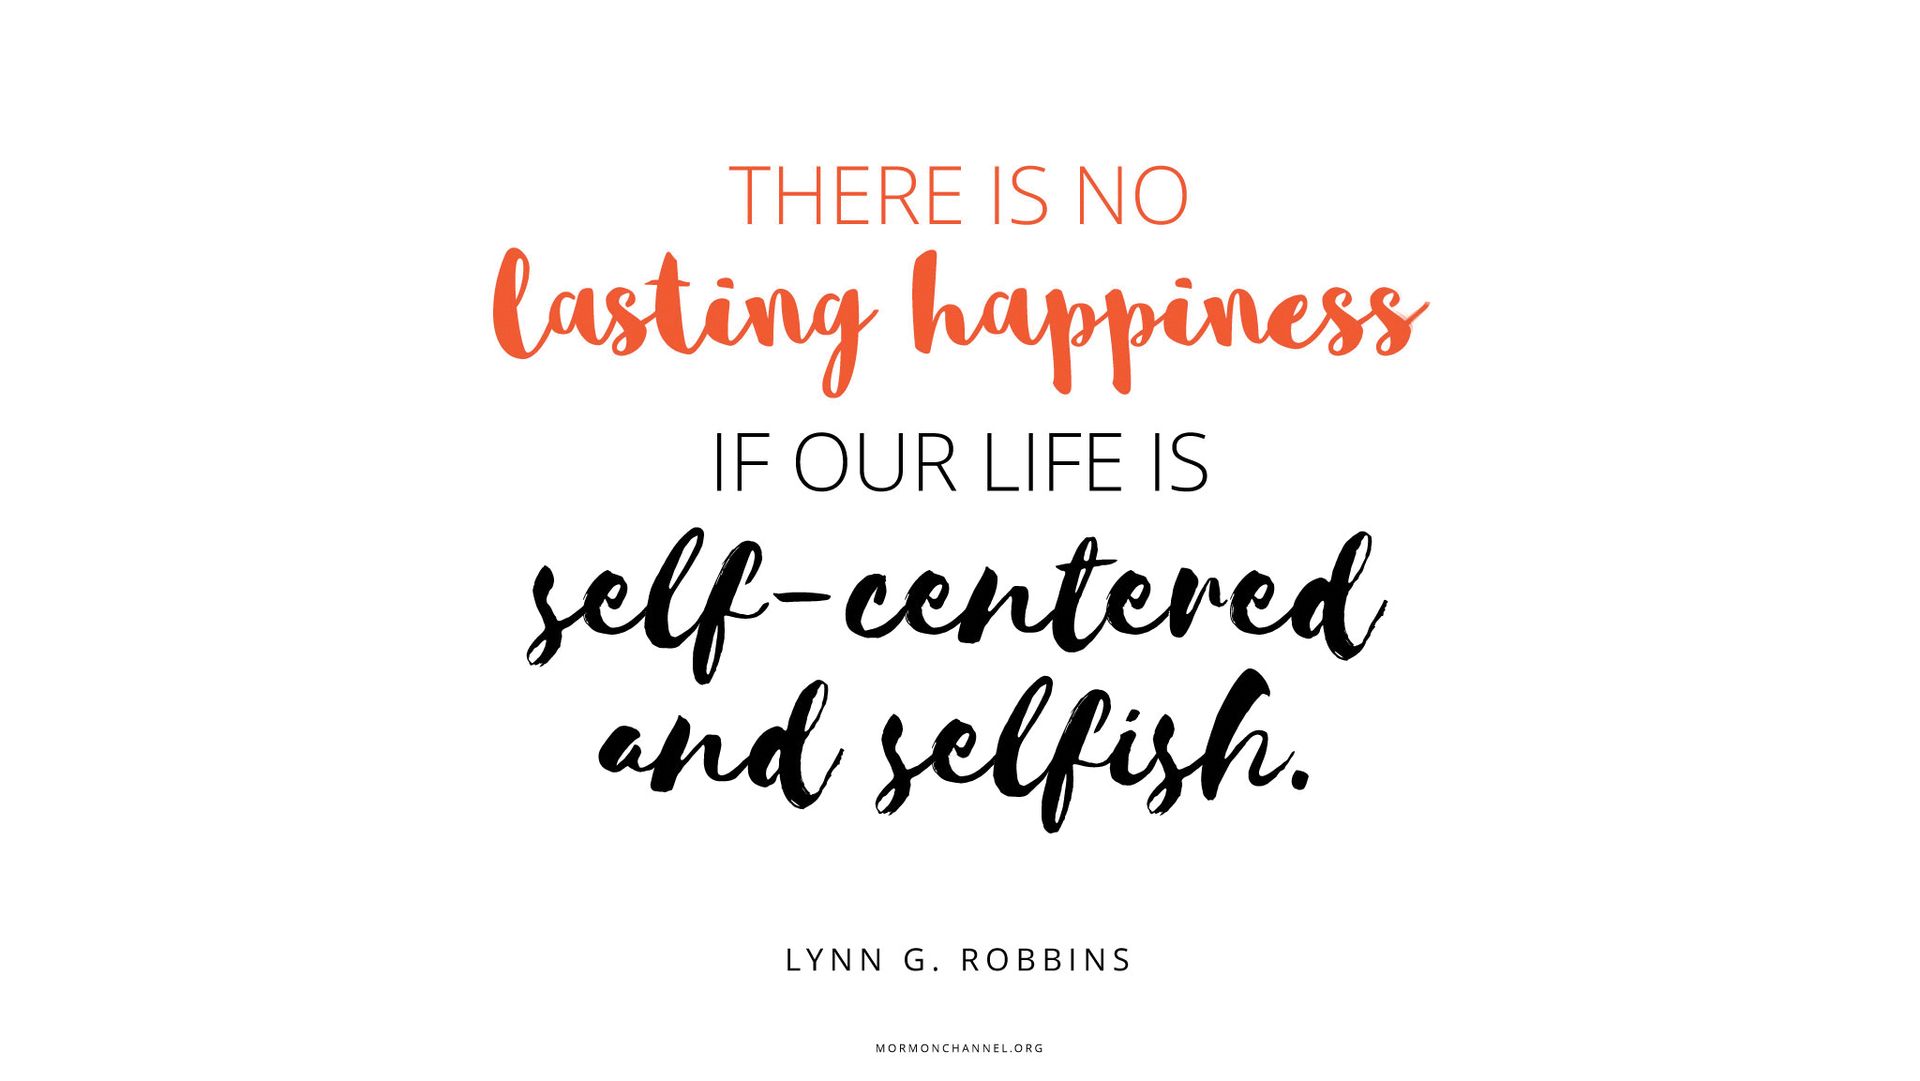 “There is no lasting happiness if our life is self-centered and selfish.”—Elder Lynn G. Robbins © undefined ipCode 1.